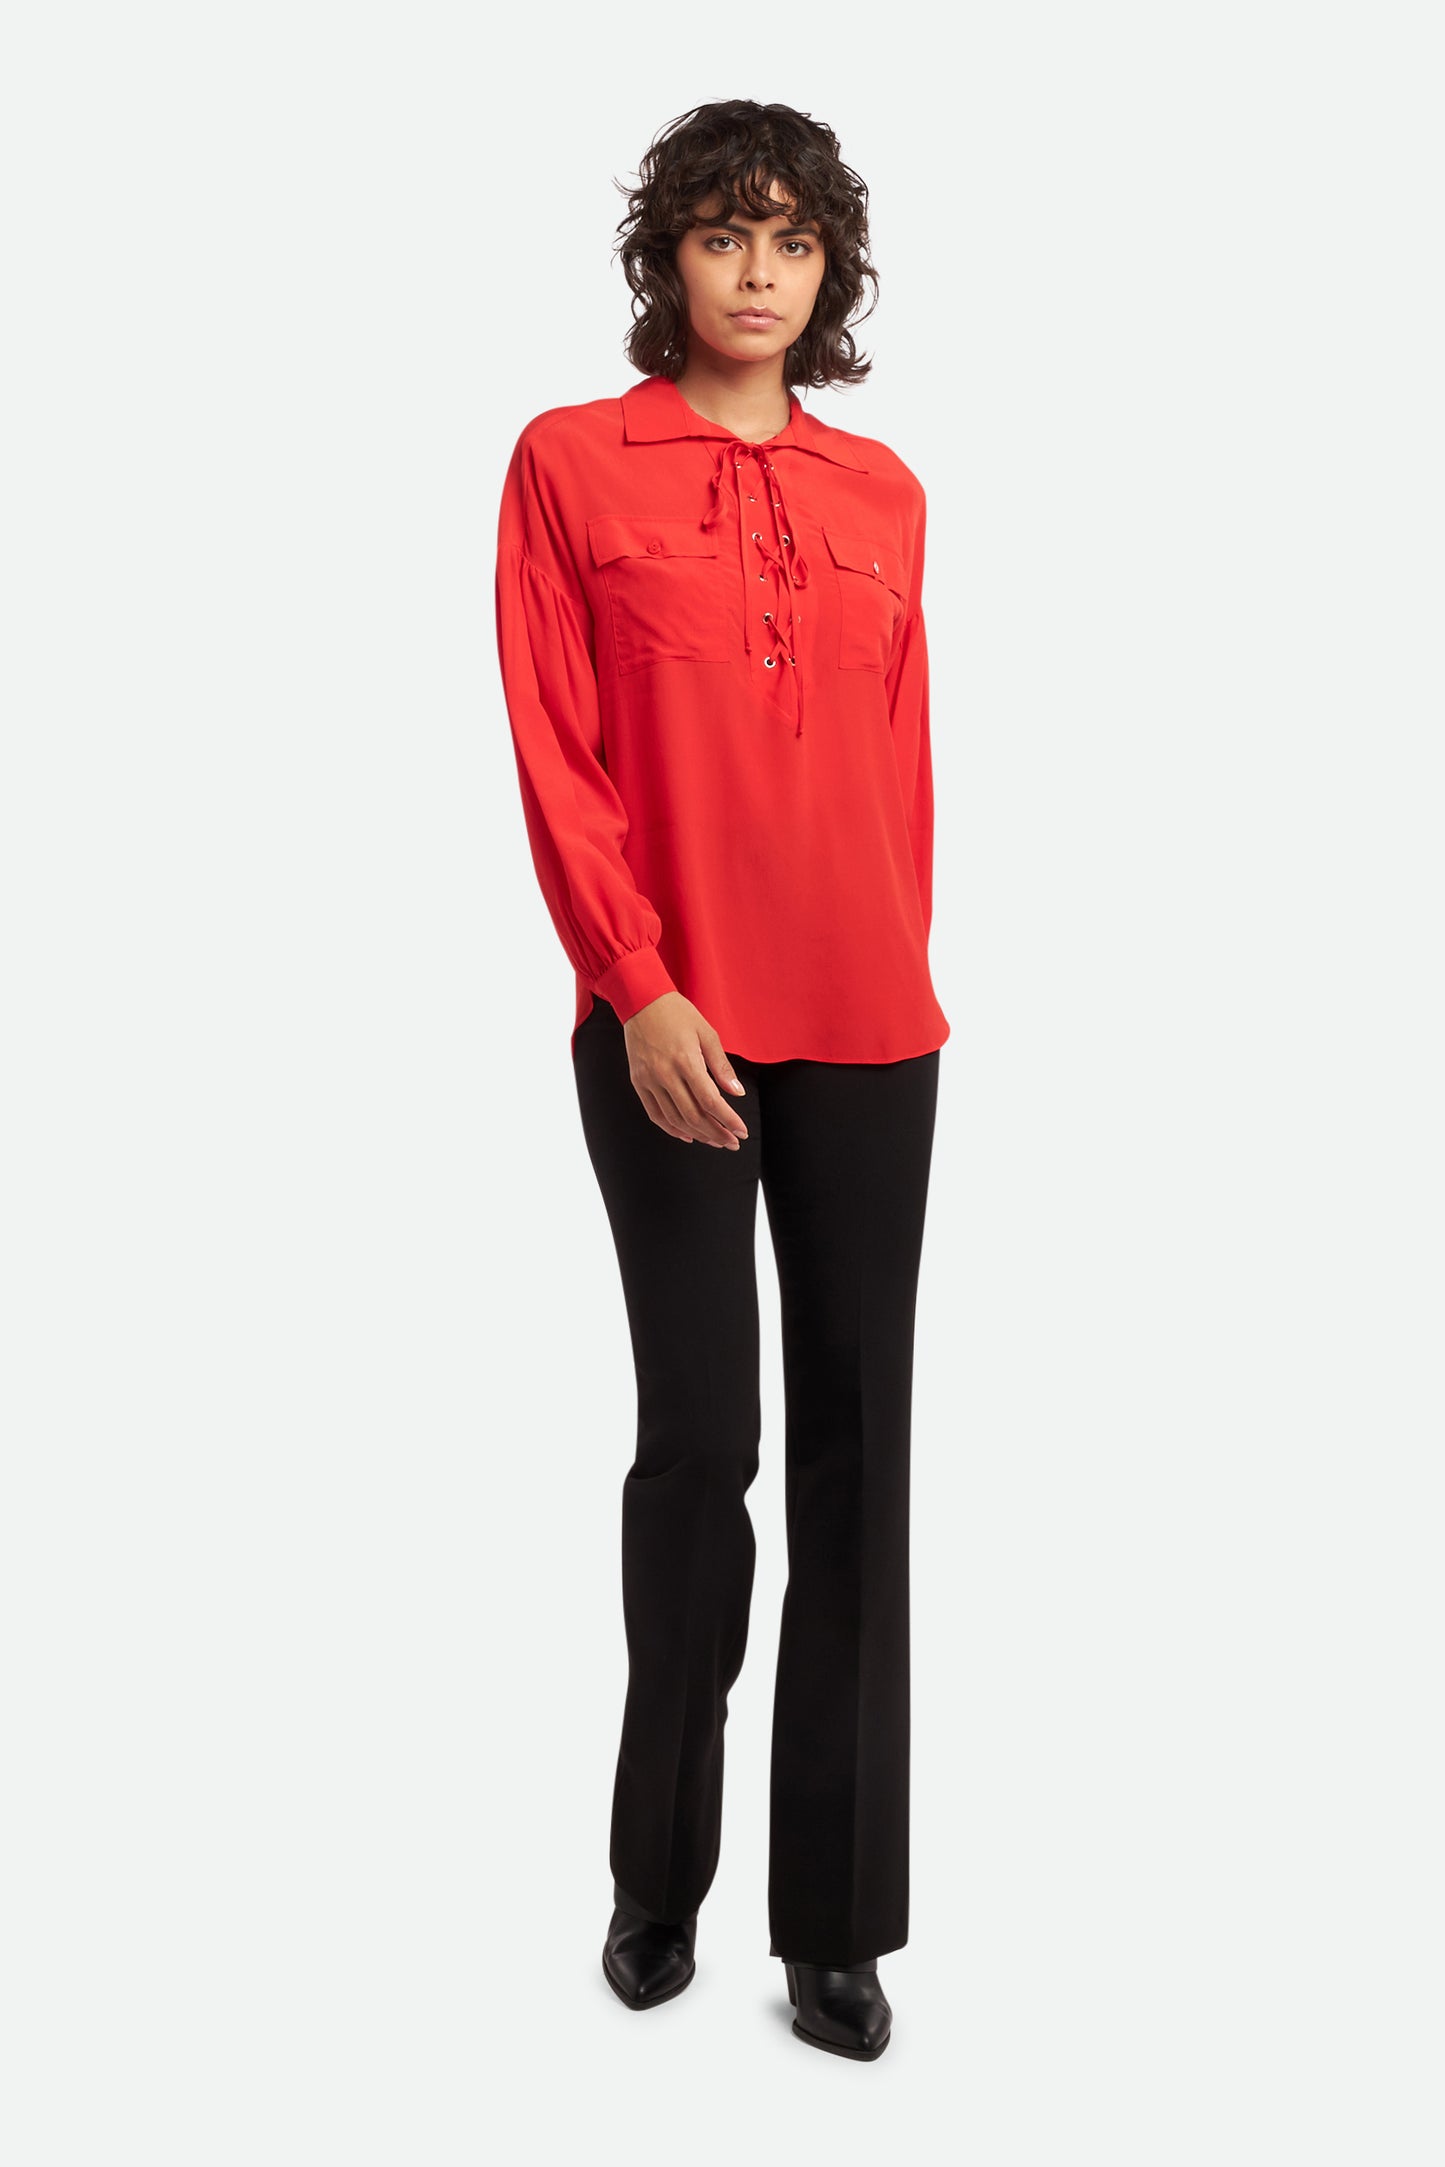 Twinset Red Shirt